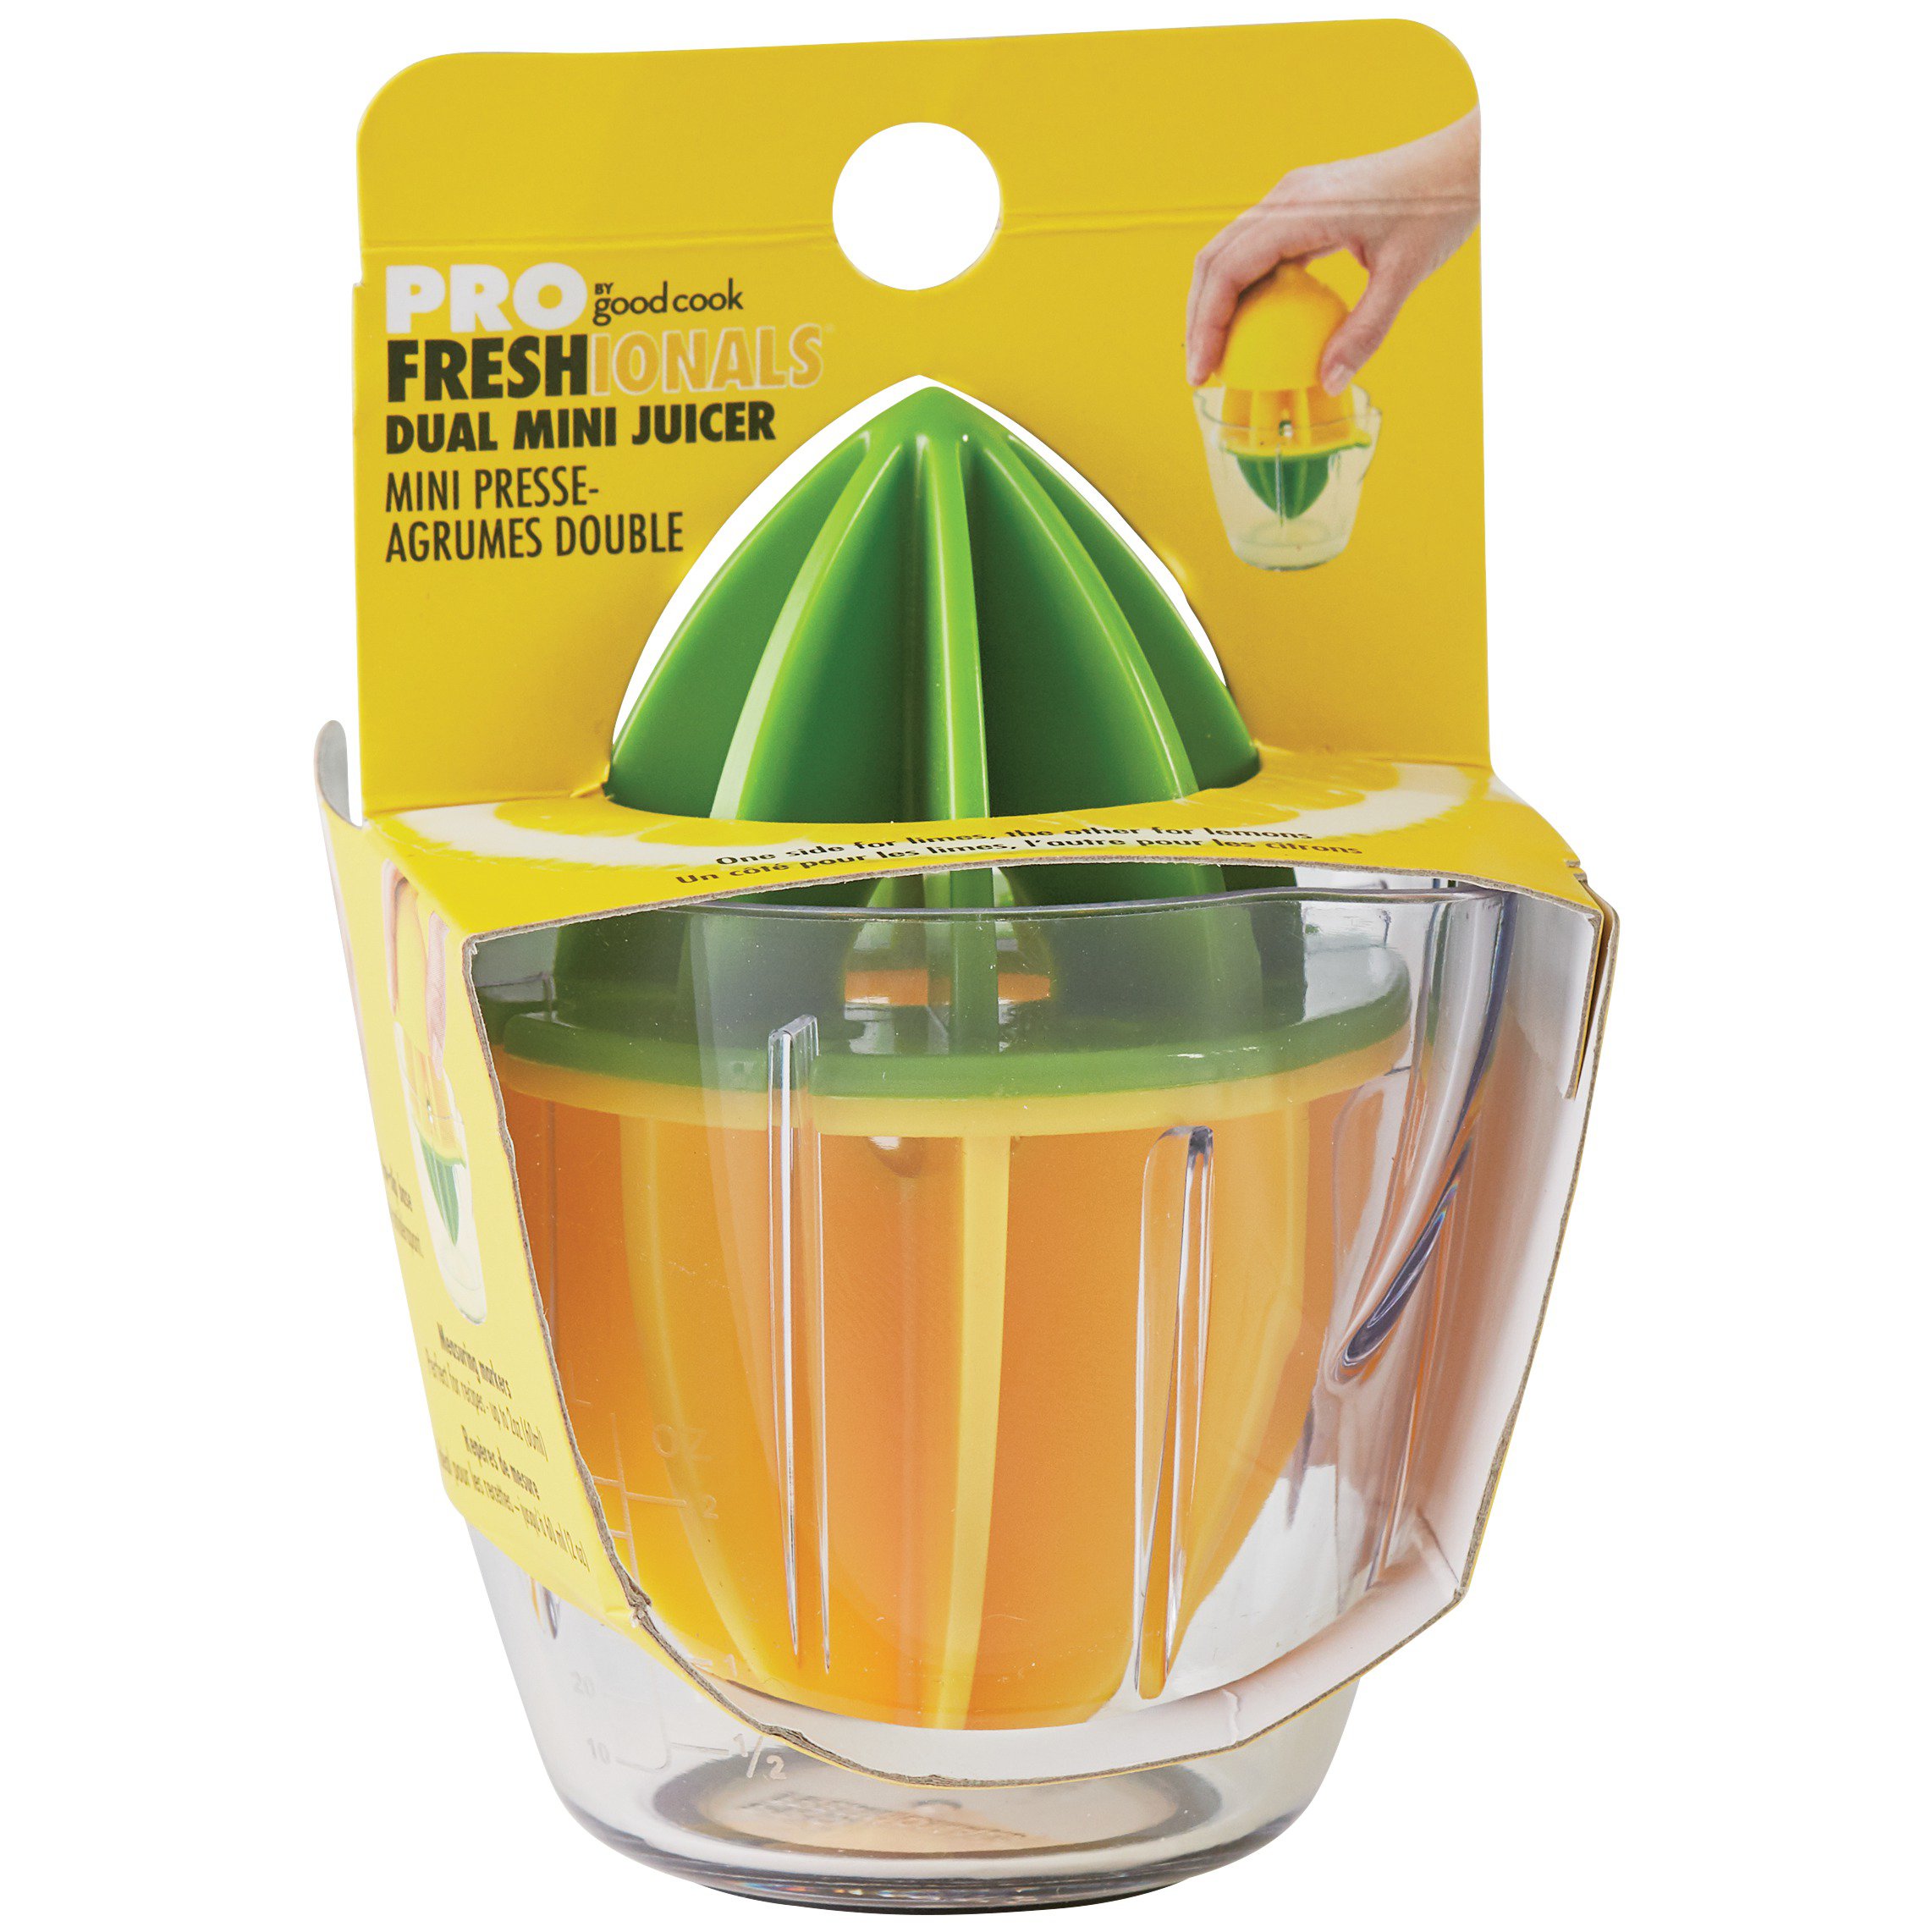 Electric Juicer Ideal for Healthy and Tasty Juices SM-CJ5 Easyline by Fimar